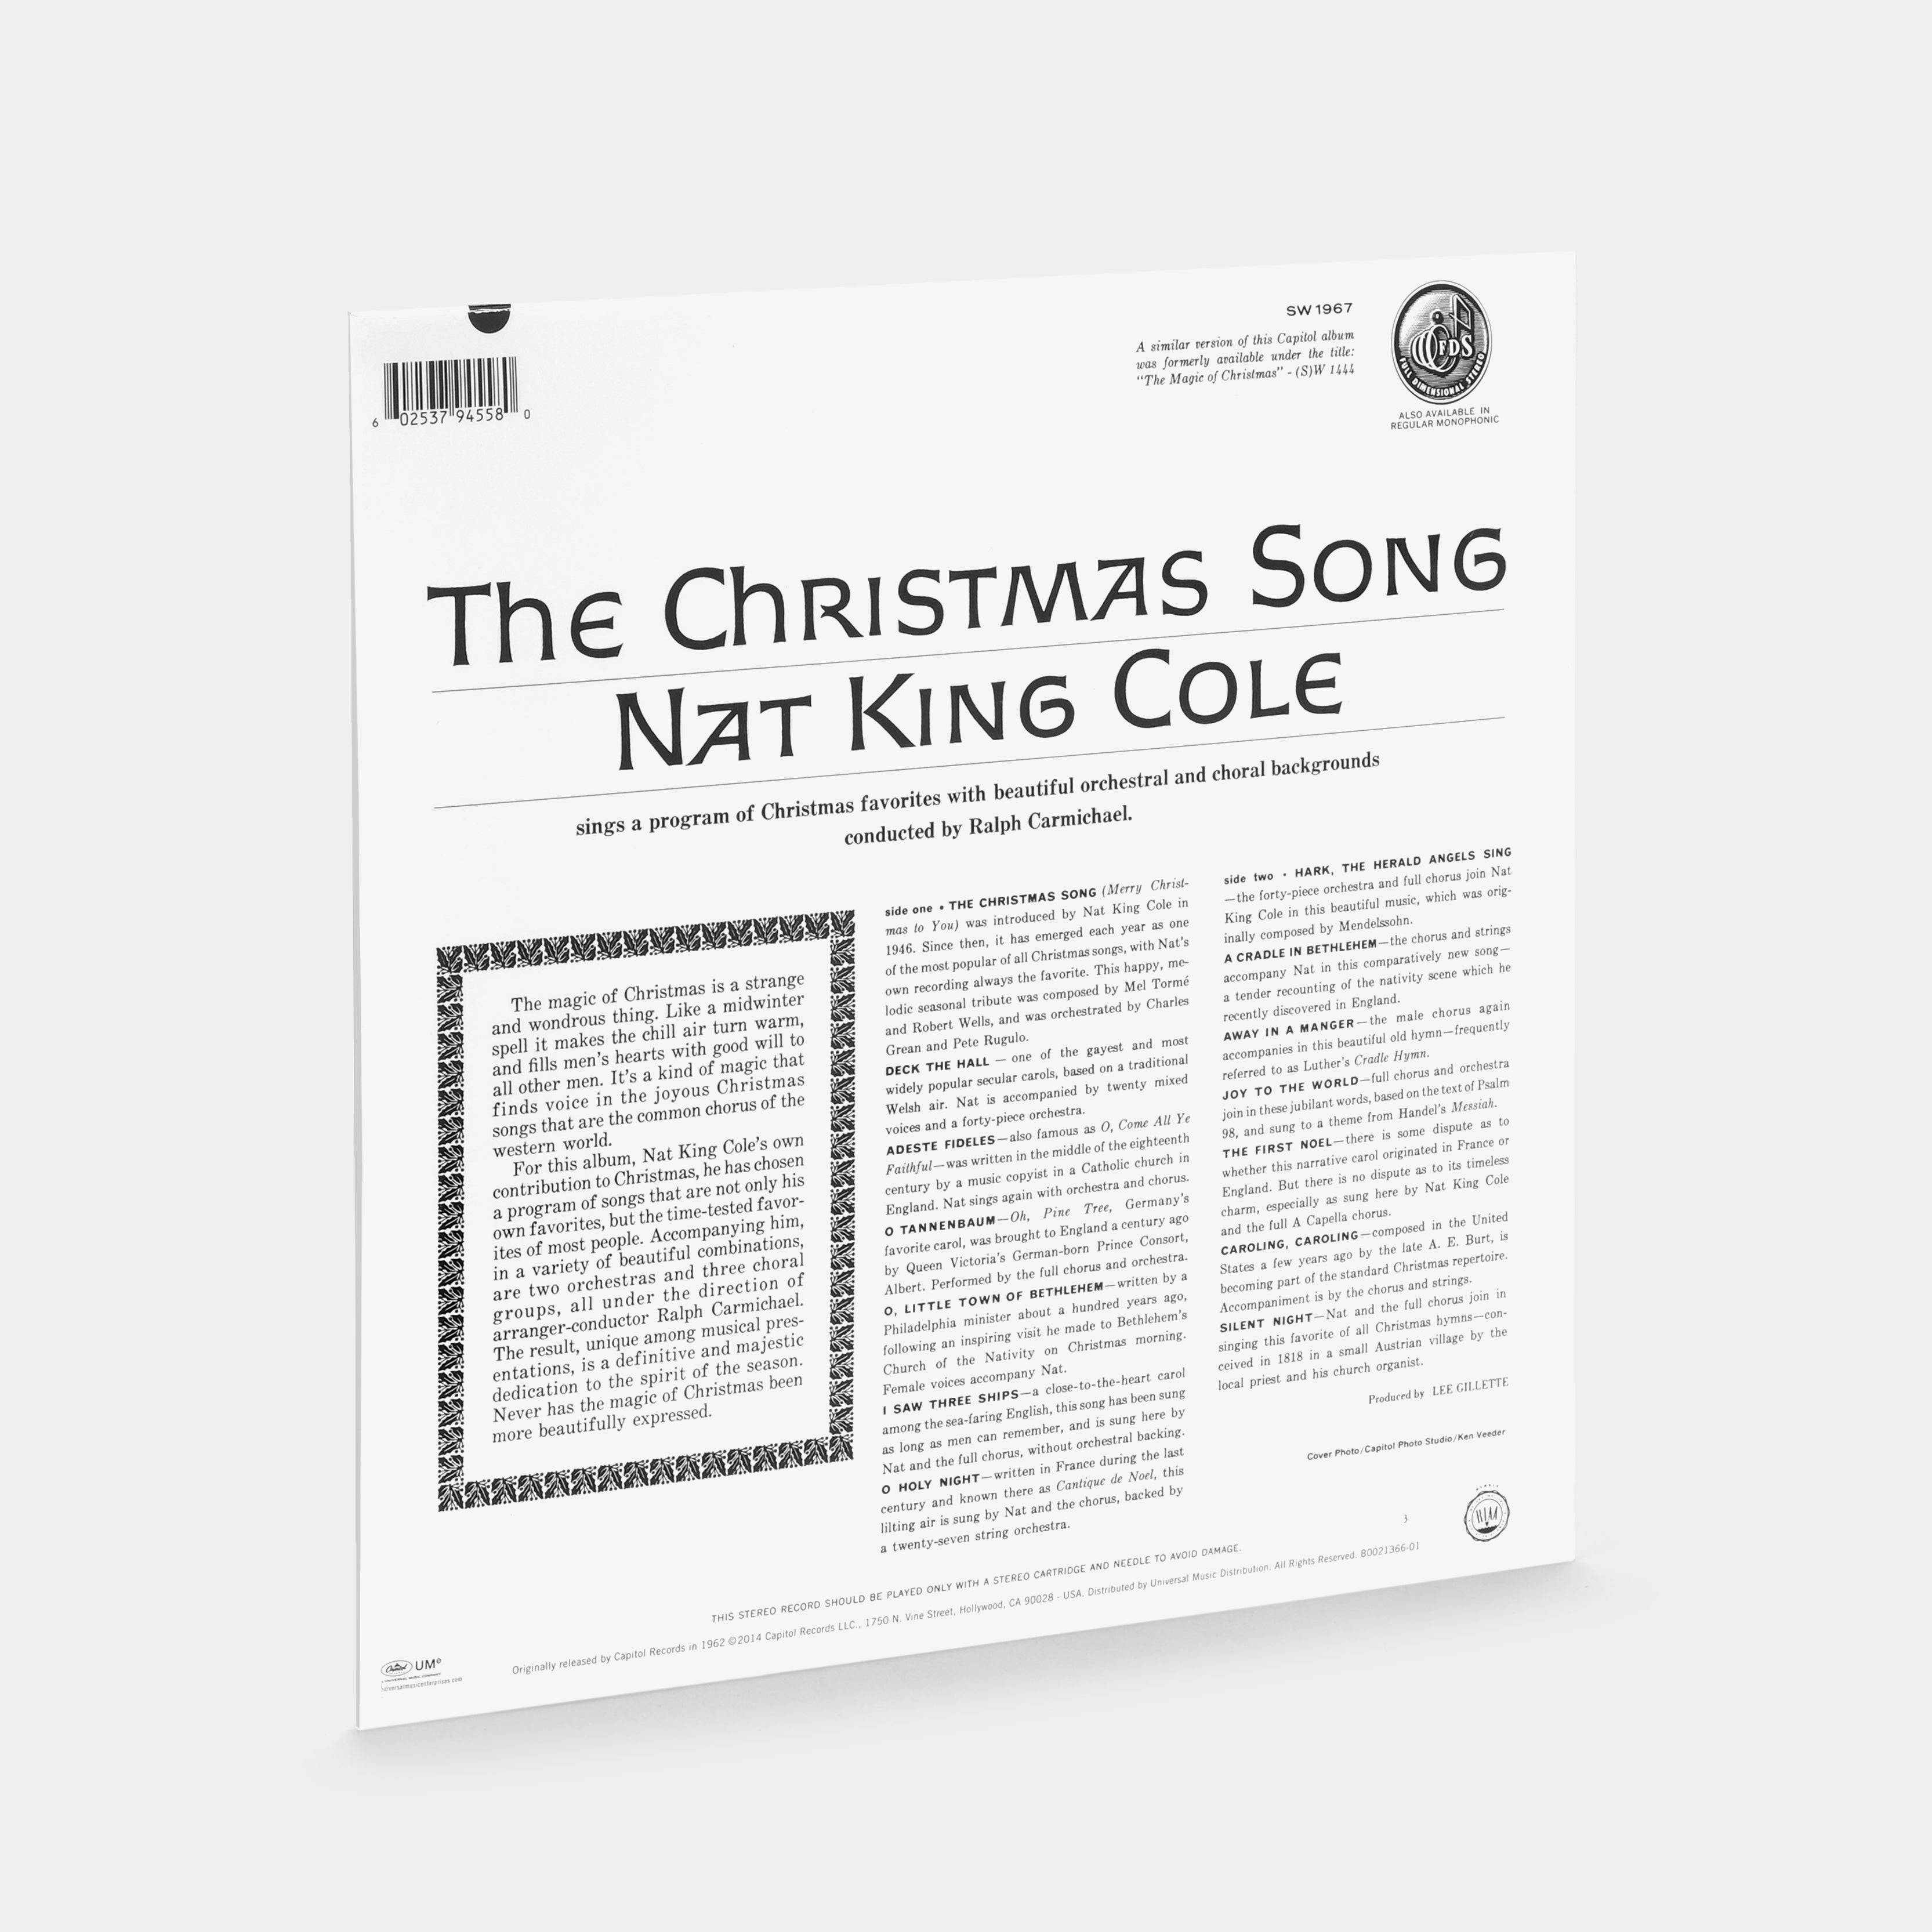 Nat King Cole - The Christmas Song LP Vinyl Record